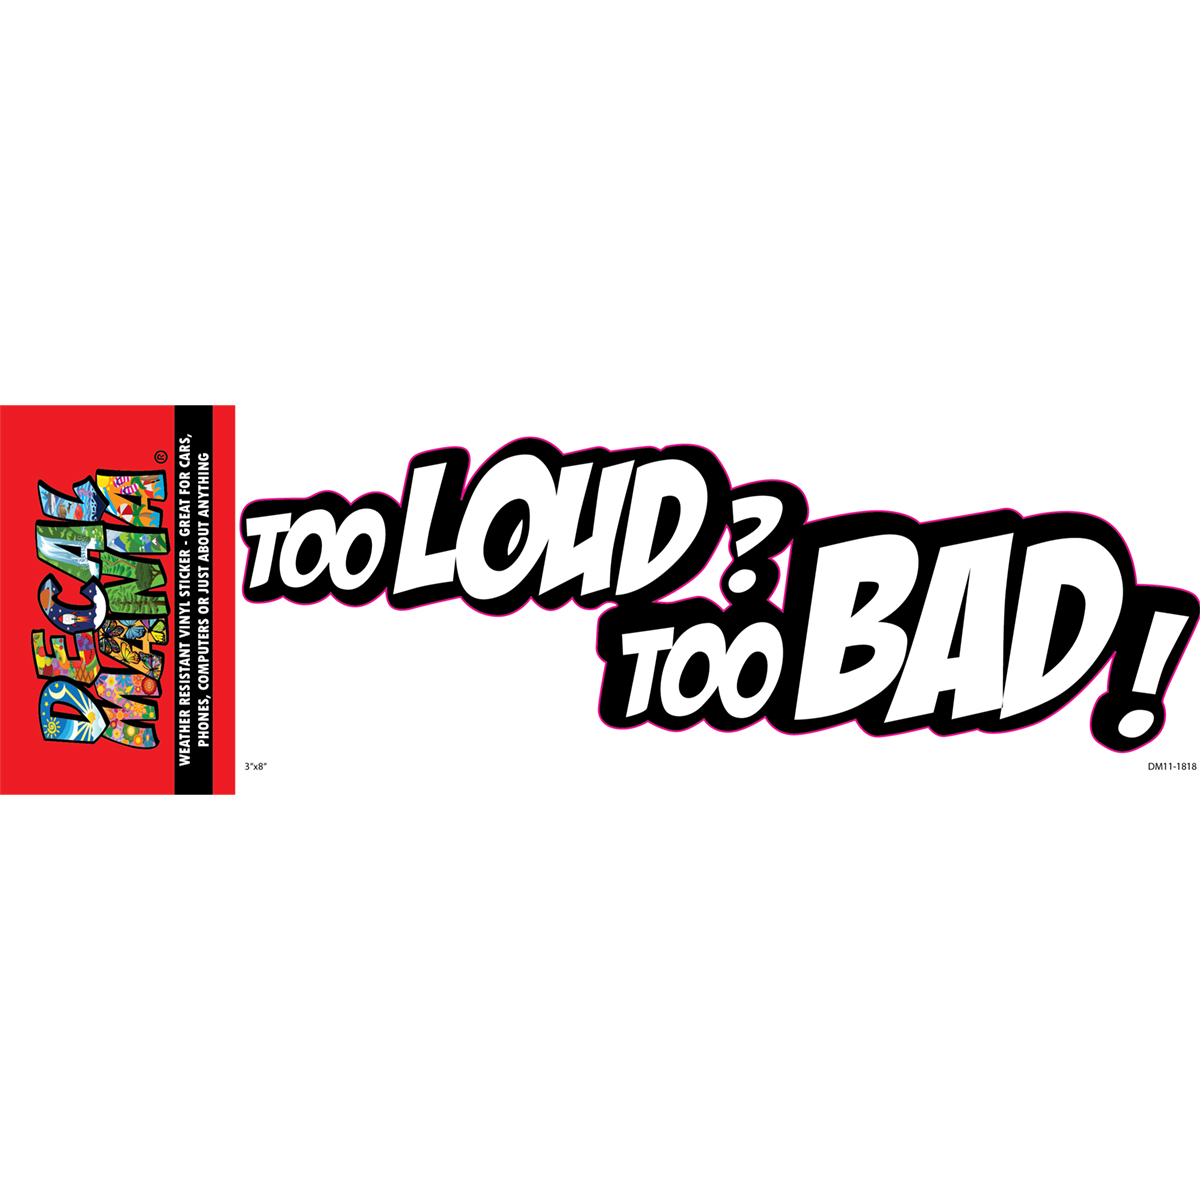 DecalMania Too Loud To Bad 1PK 8in Decal